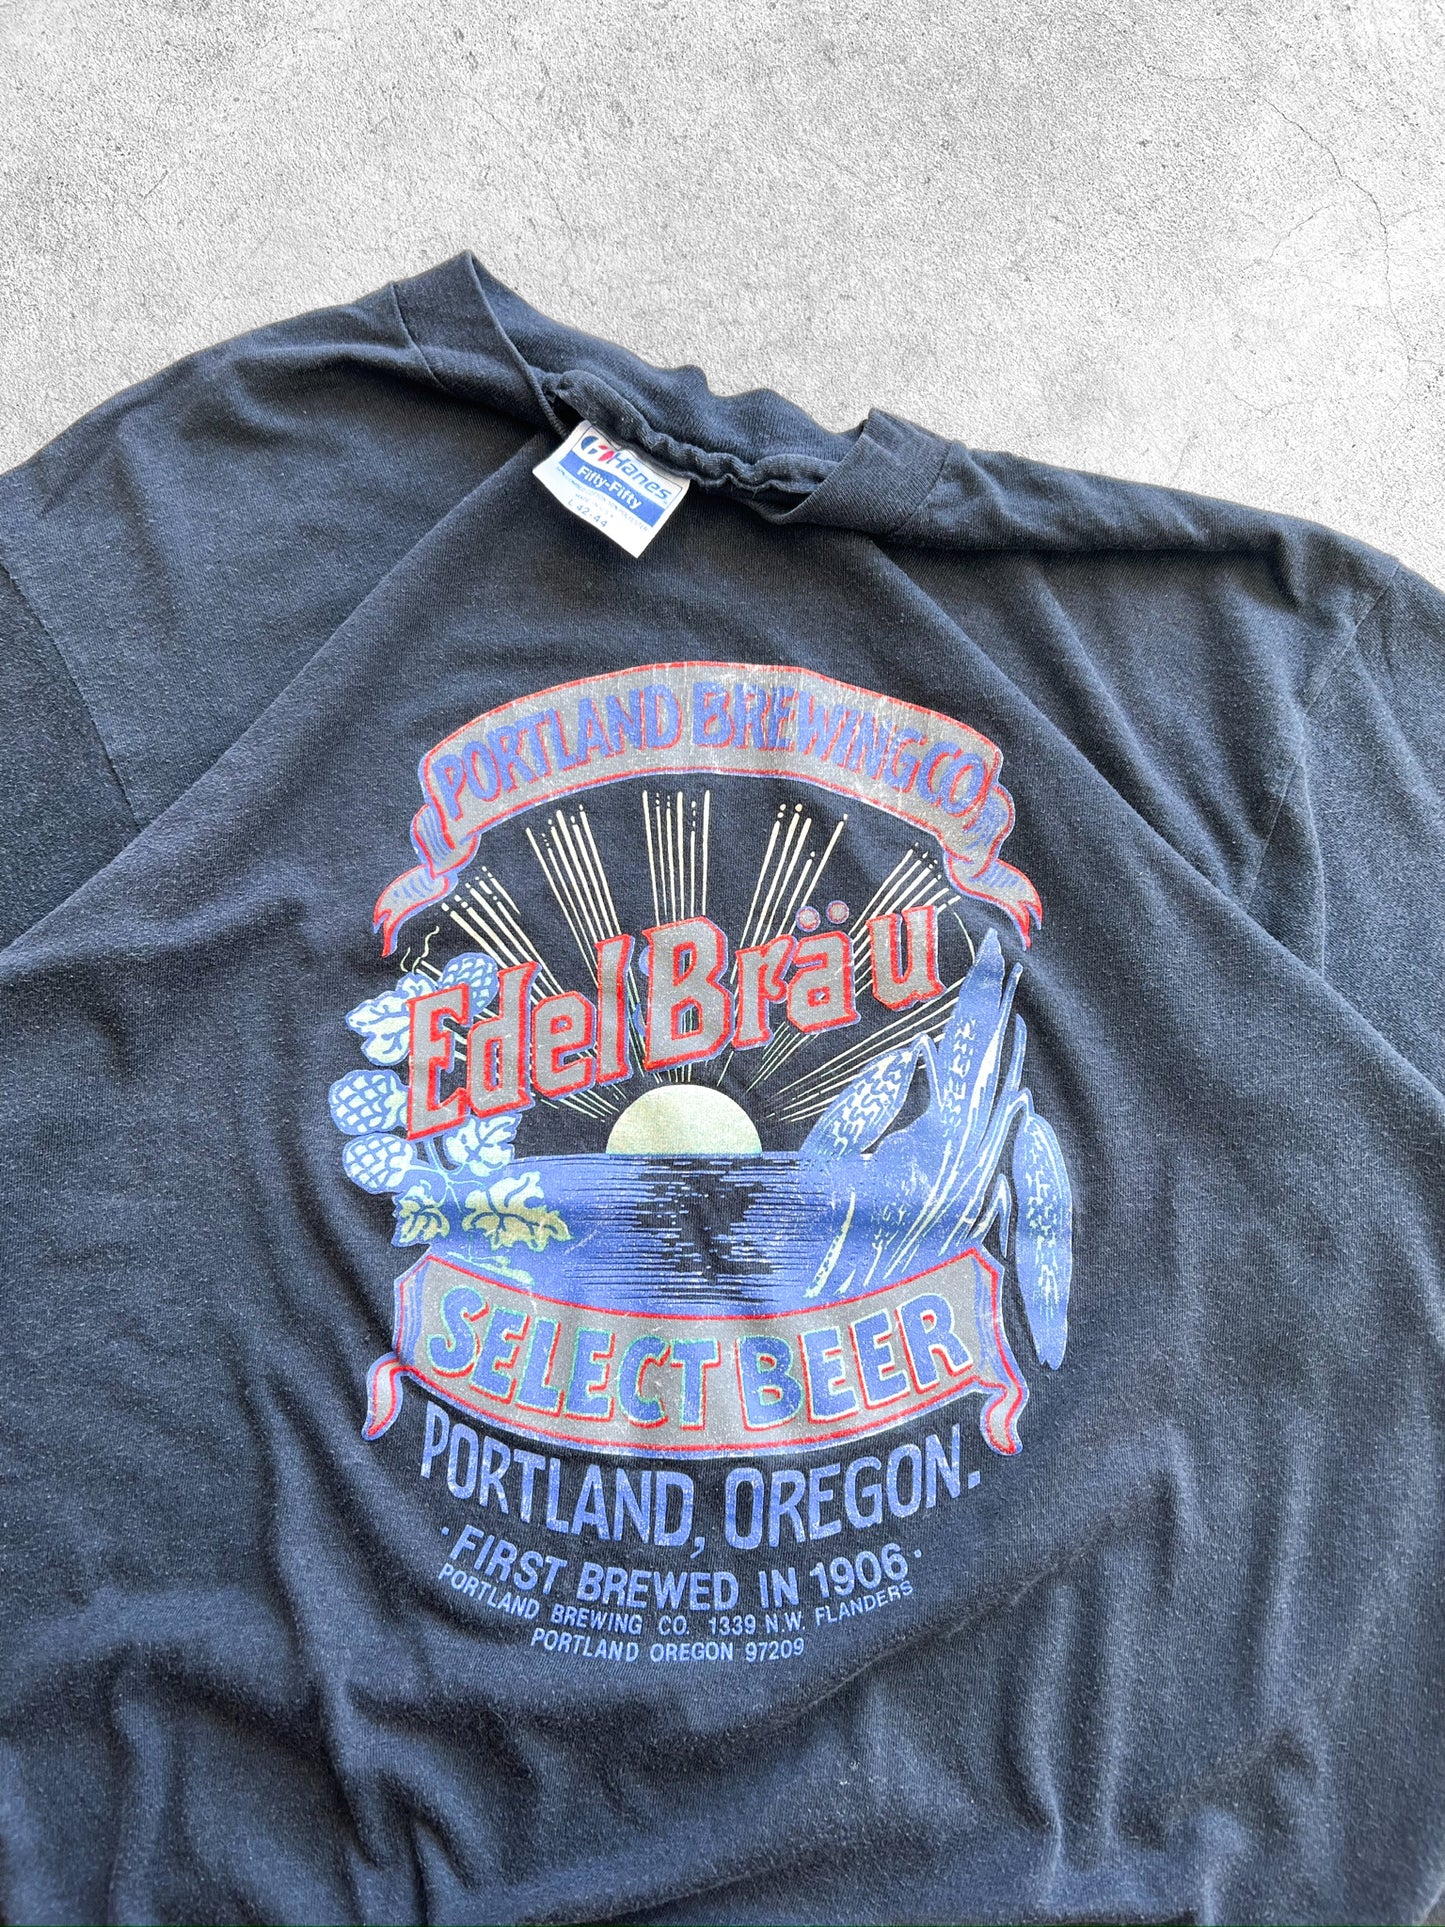 80’s Portland Brewing Co. Beer Shirt - M